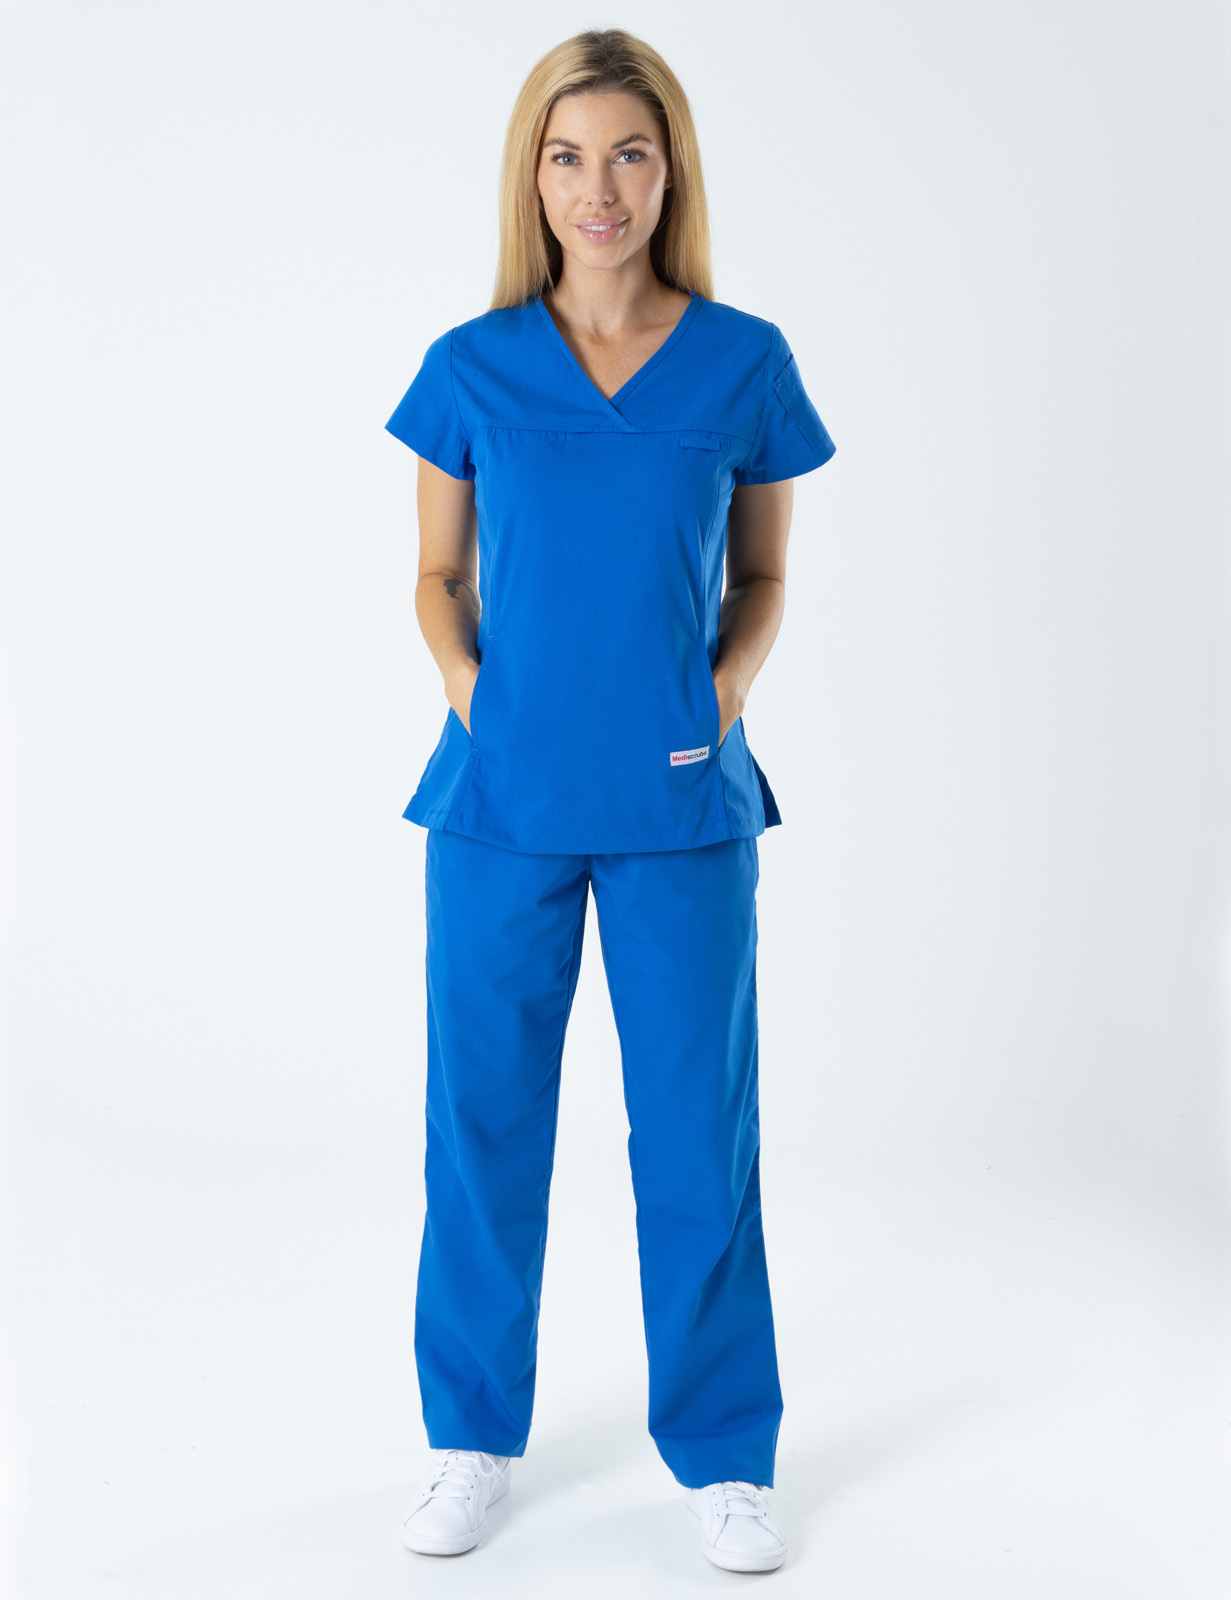 Canberra Hospital - Cardiology Cardiac Technologist (Women's Fit Solid Scrub Top and Cargo Pants in Royal incl Logos)